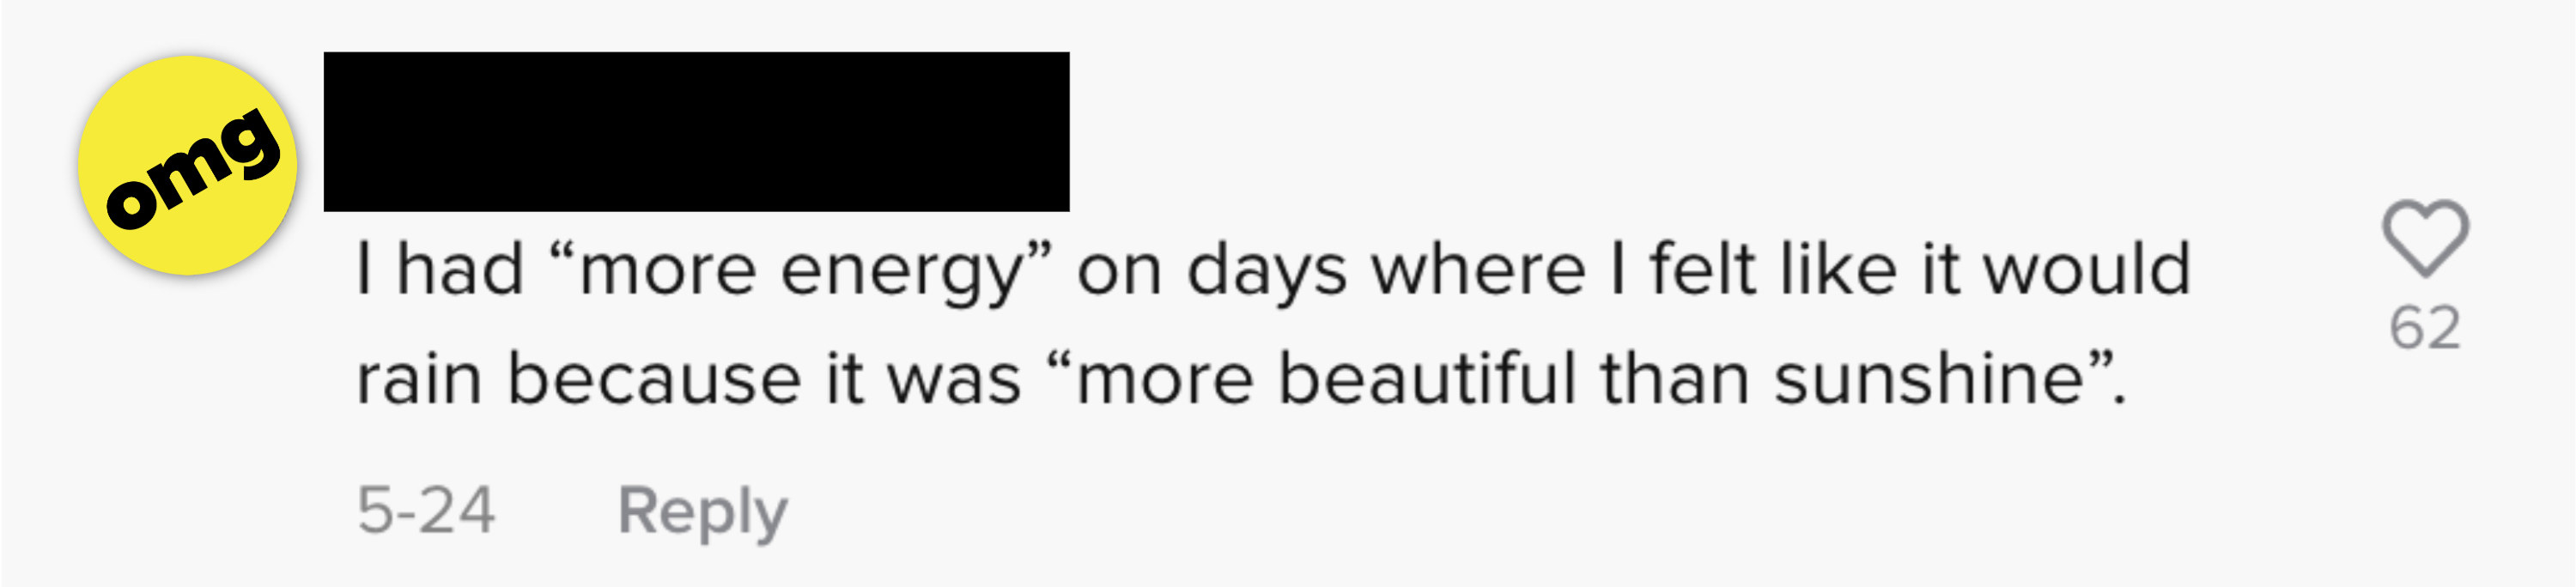 I had &quot;more energy&quot; on days where I felt like it would rain because it was &quot;more beautiful than sunshine&quot;